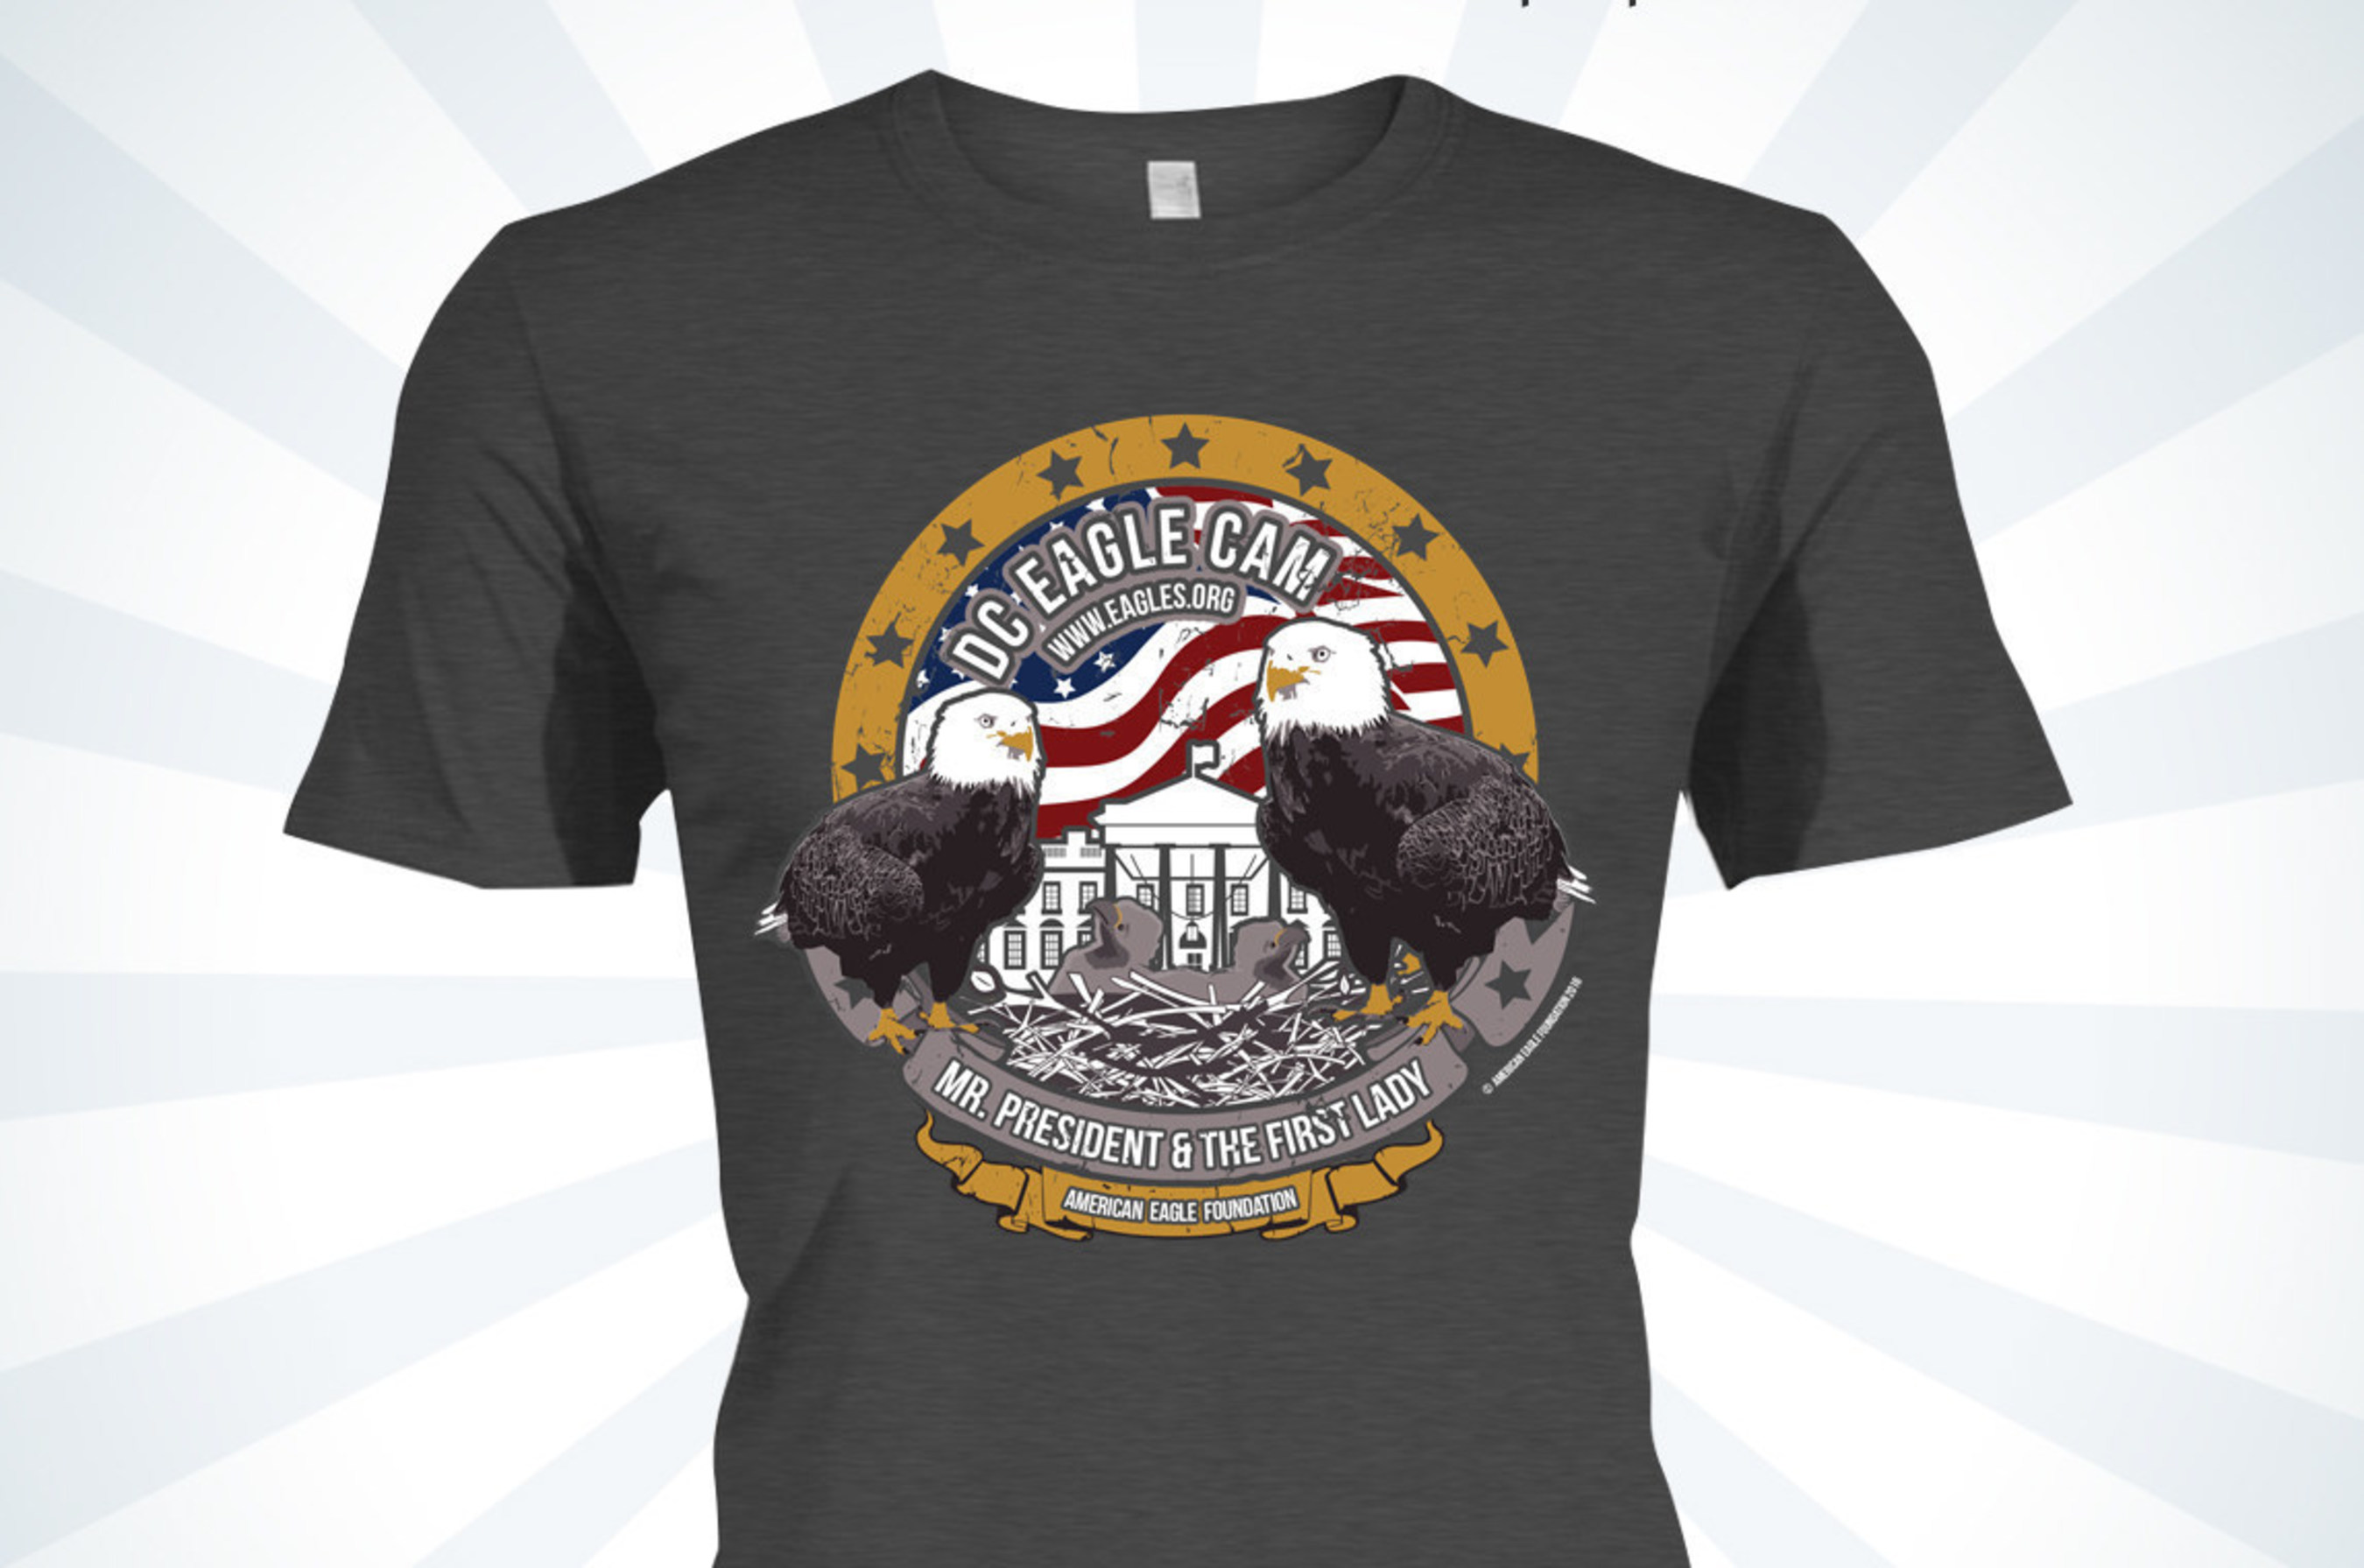 The 501(c)(3) non-profit American Eagle Foundation, which provides the high-definition streaming, camera operation, and web-presence for the DC Eagle Cam project, has launched a special t-shirt fundraiser to help keep the project running successfully. 100% of net proceeds from this fundraiser will be utilized directly for the streaming and operational costs of the project. Photo Copyright American Eagle Foundation 2016